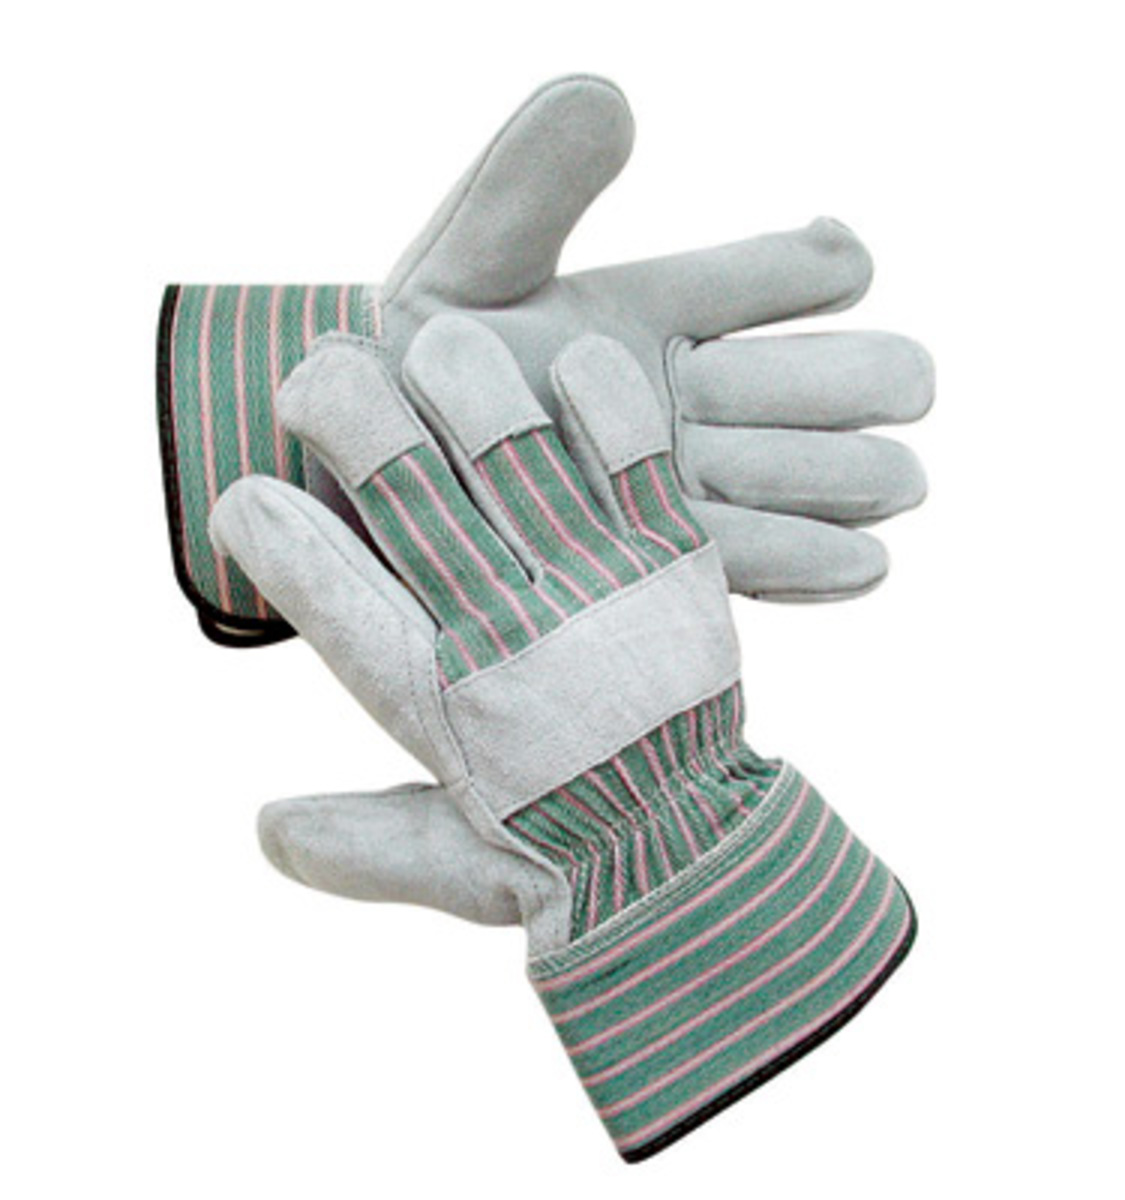 RADNOR® Large Shoulder Split Leather Palm Gloves With Canvas Back And Safety Cuff